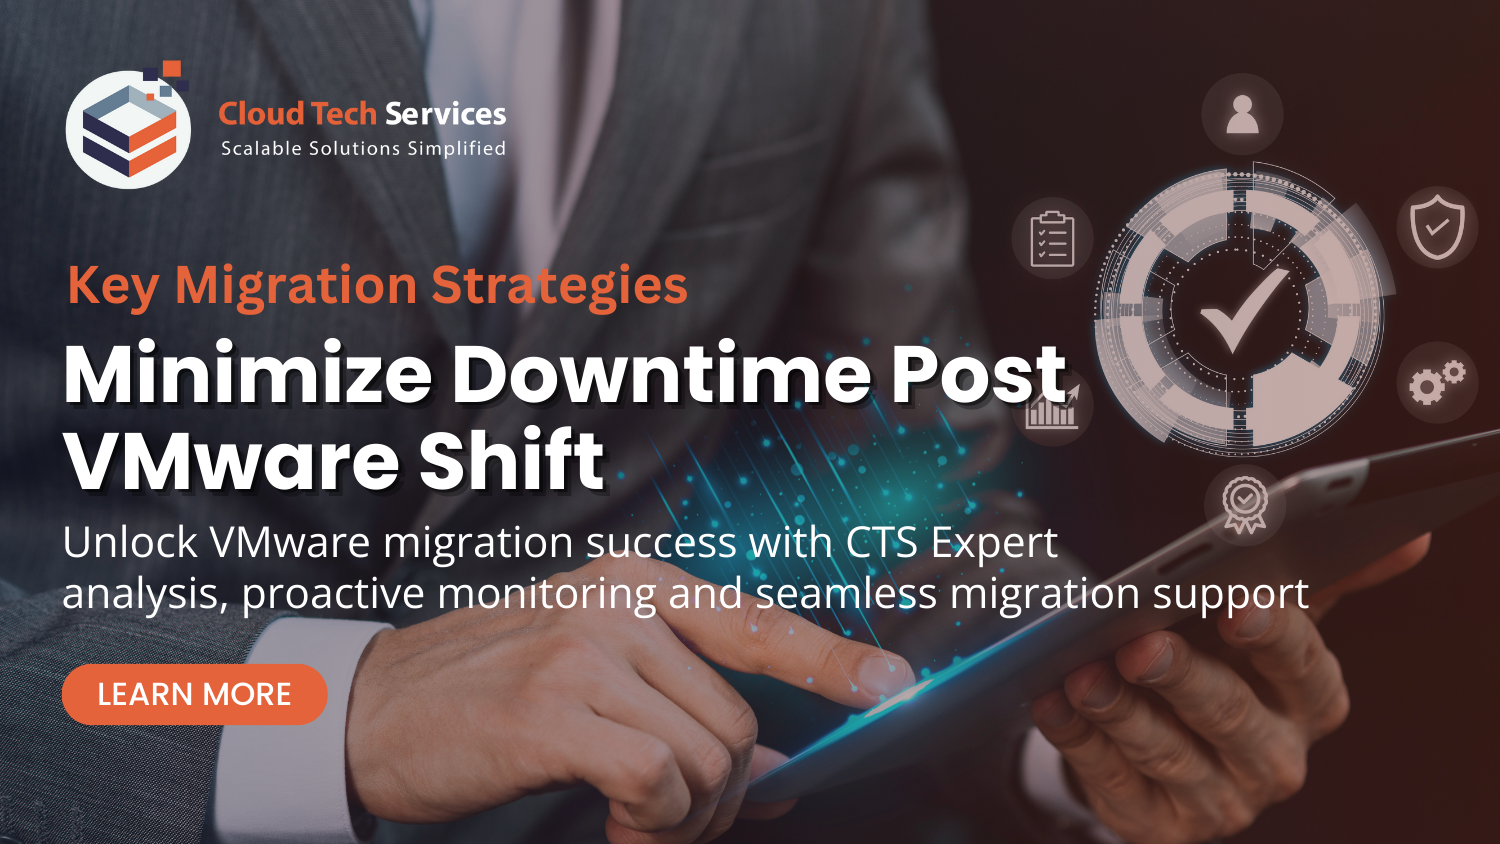 The Key Migration Strategies to Minimize Downtime Post VMware Shift